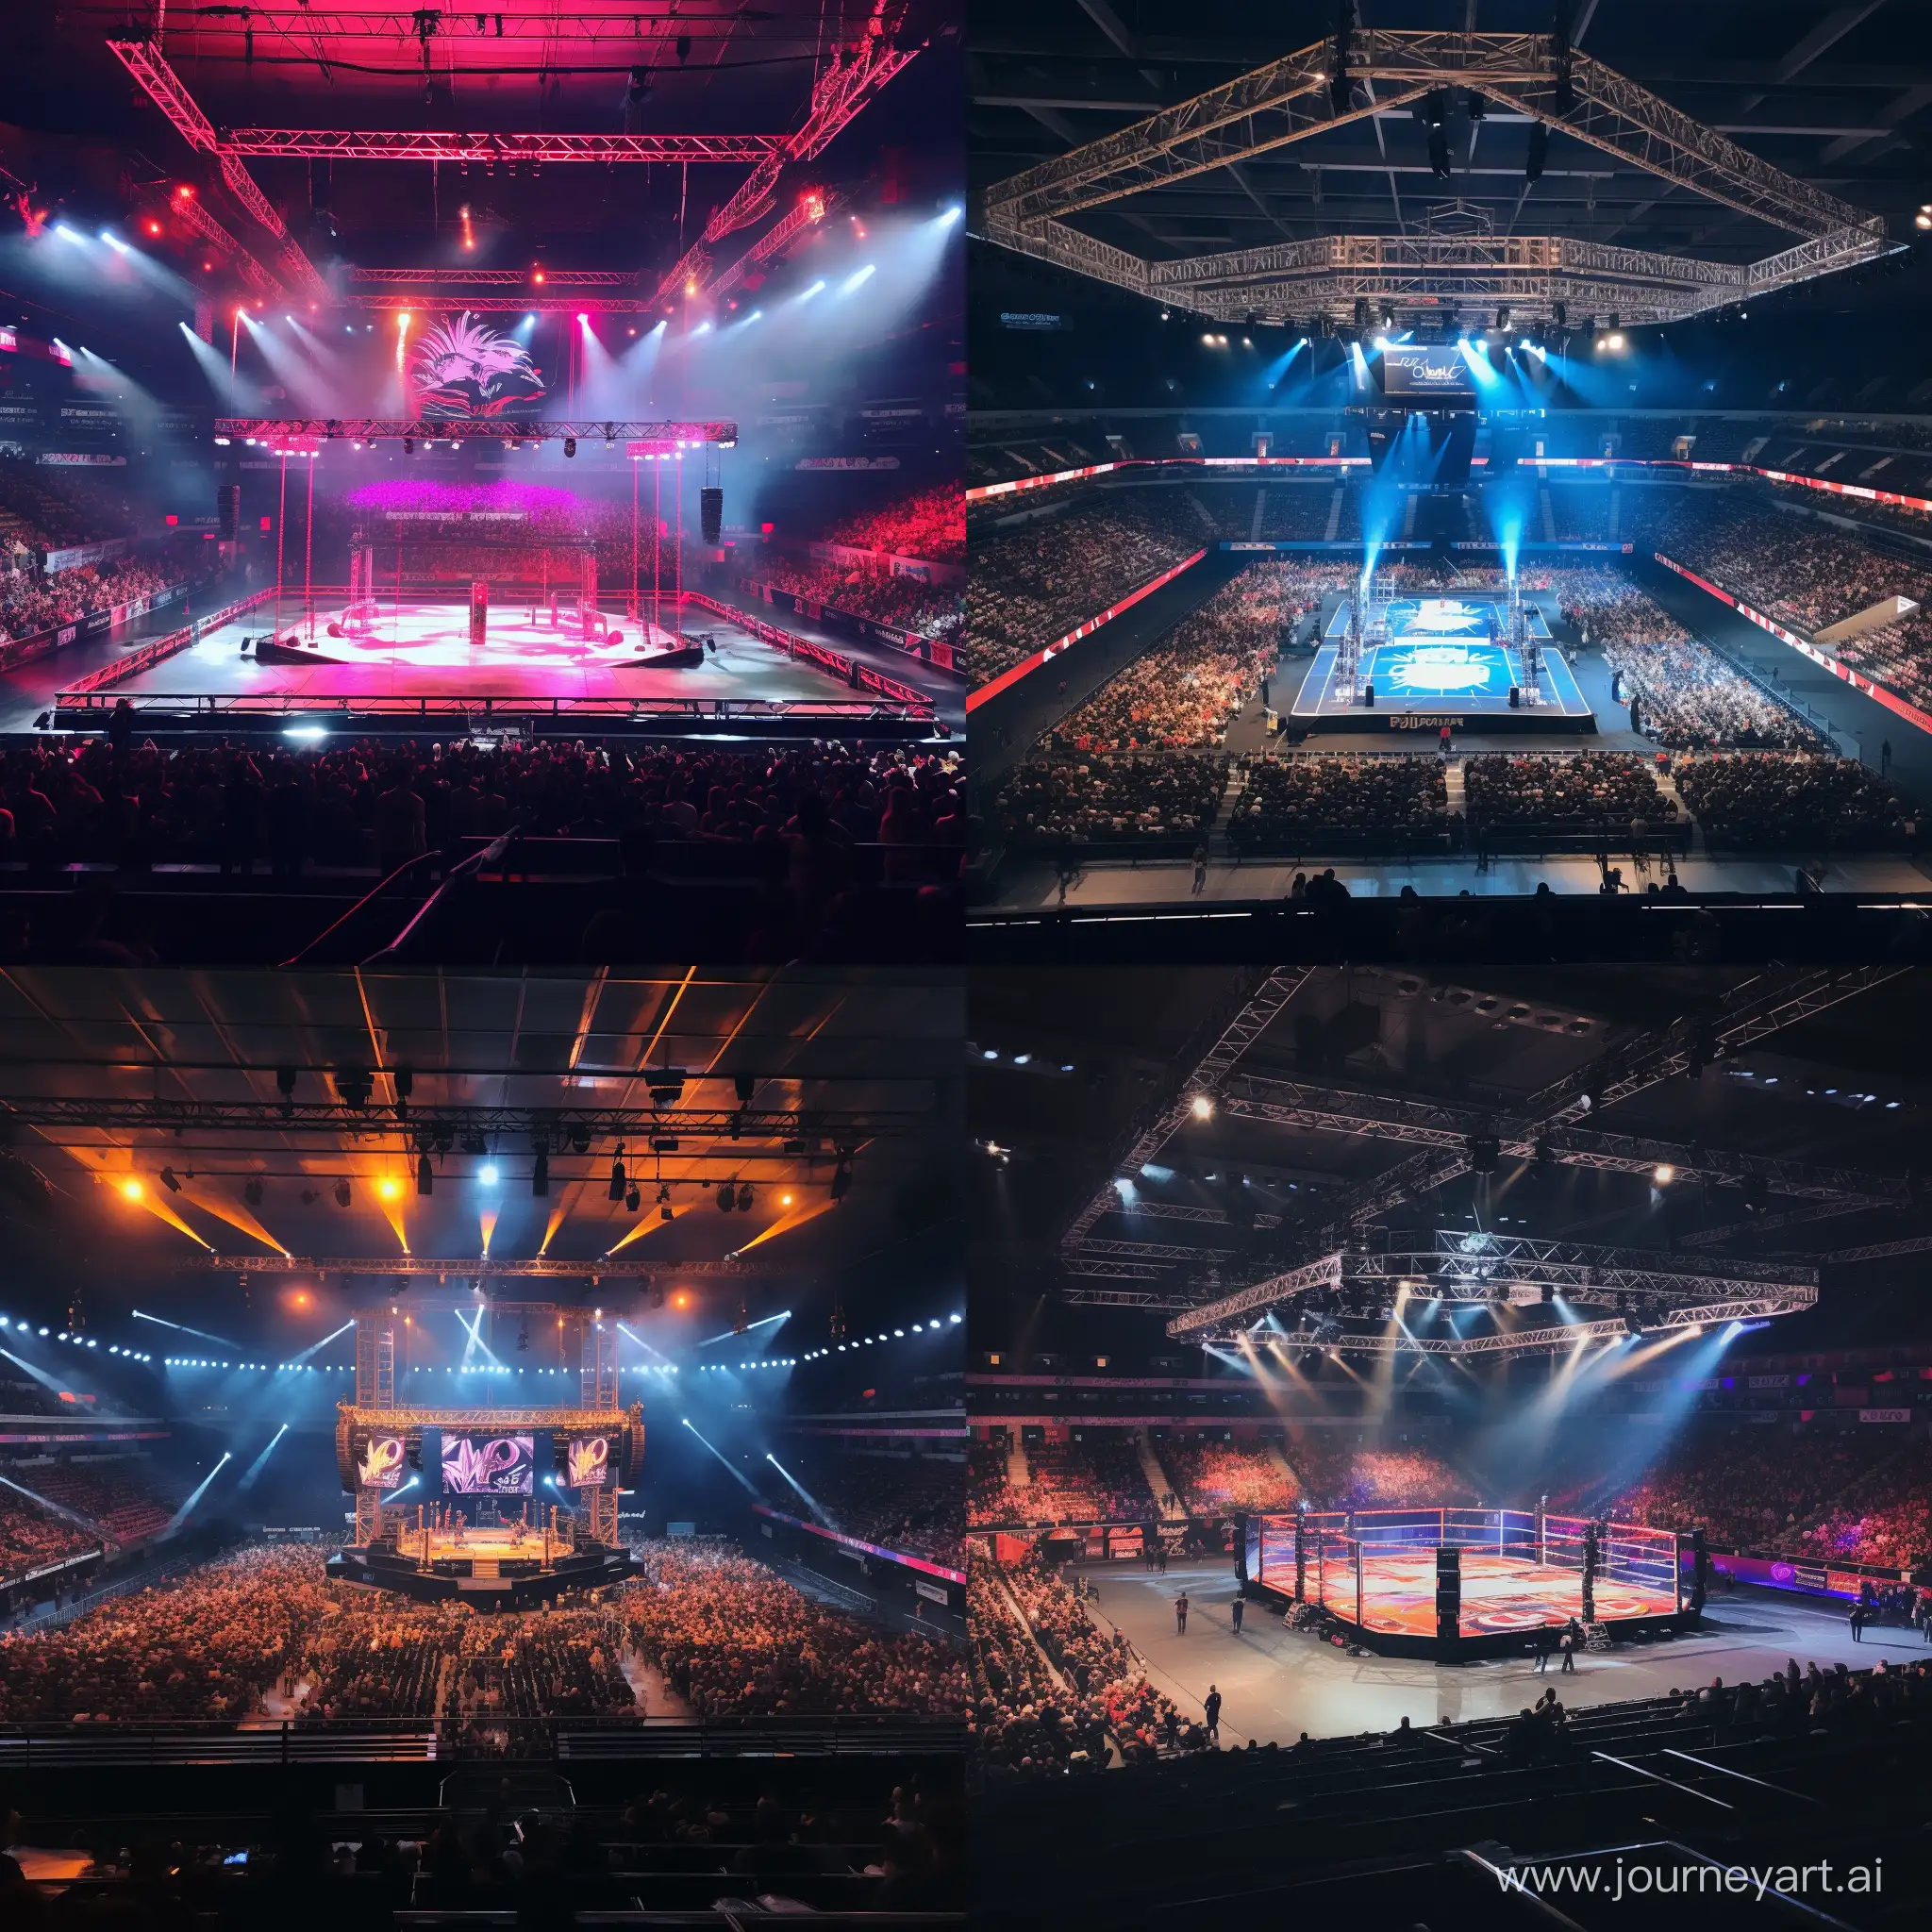 Exciting-WWE-Arena-Show-in-Lyon-AR-11-Captivating-Live-Wrestling-Action